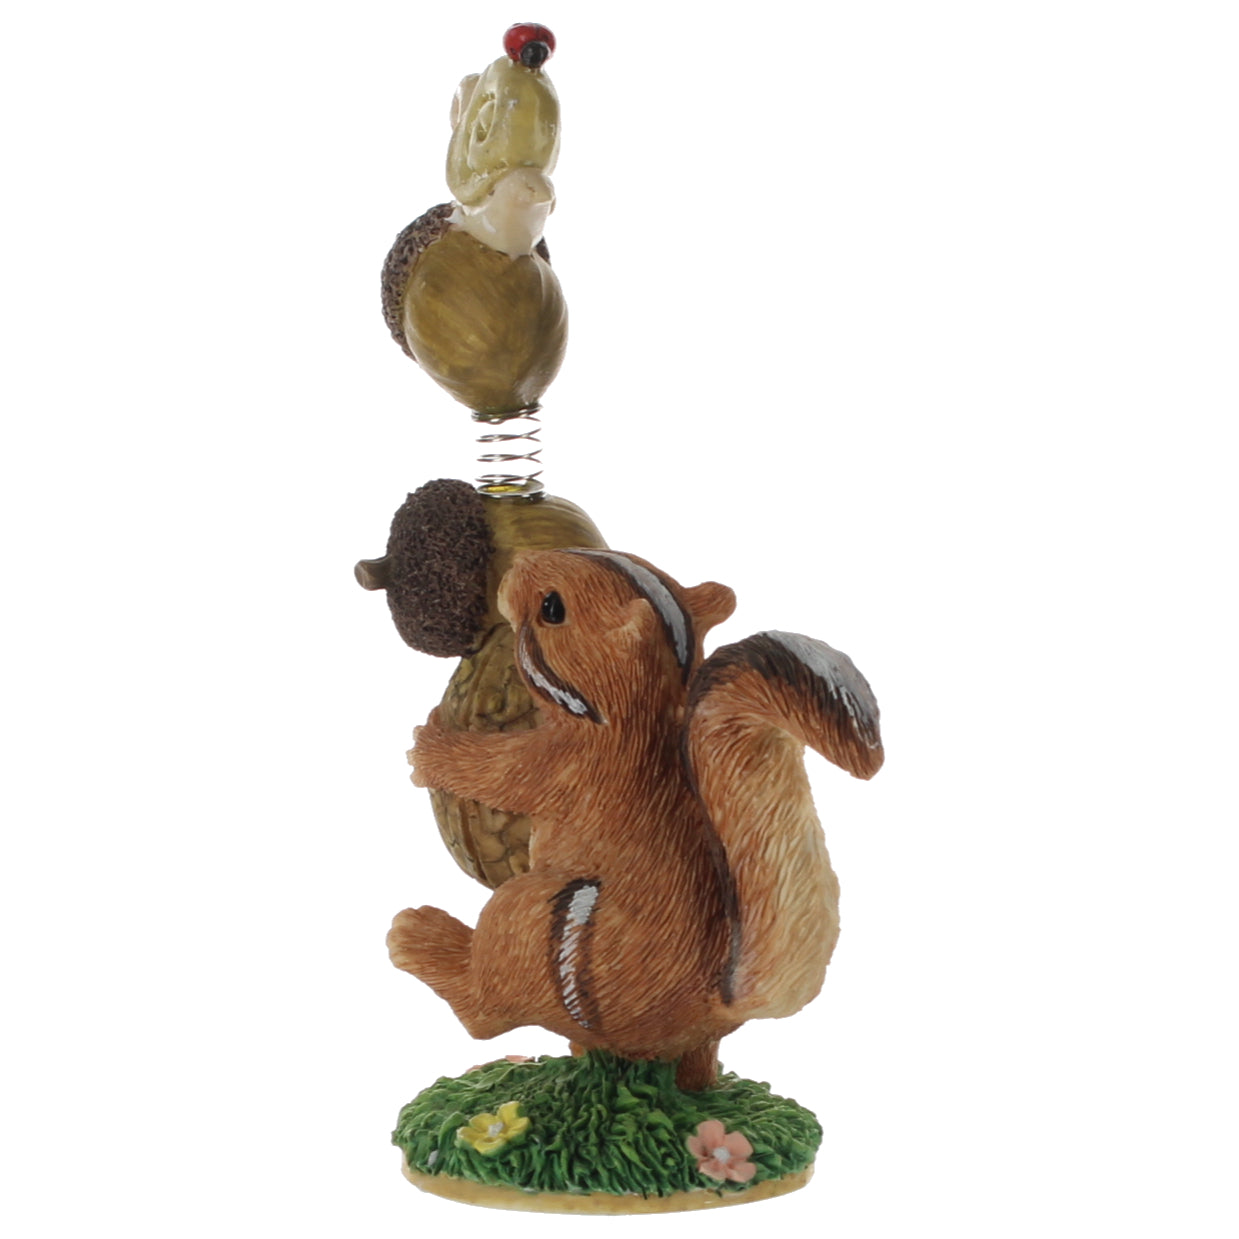 Charming-Tails-Resin-Figurine-Youre-Nutty-Figurine-87451